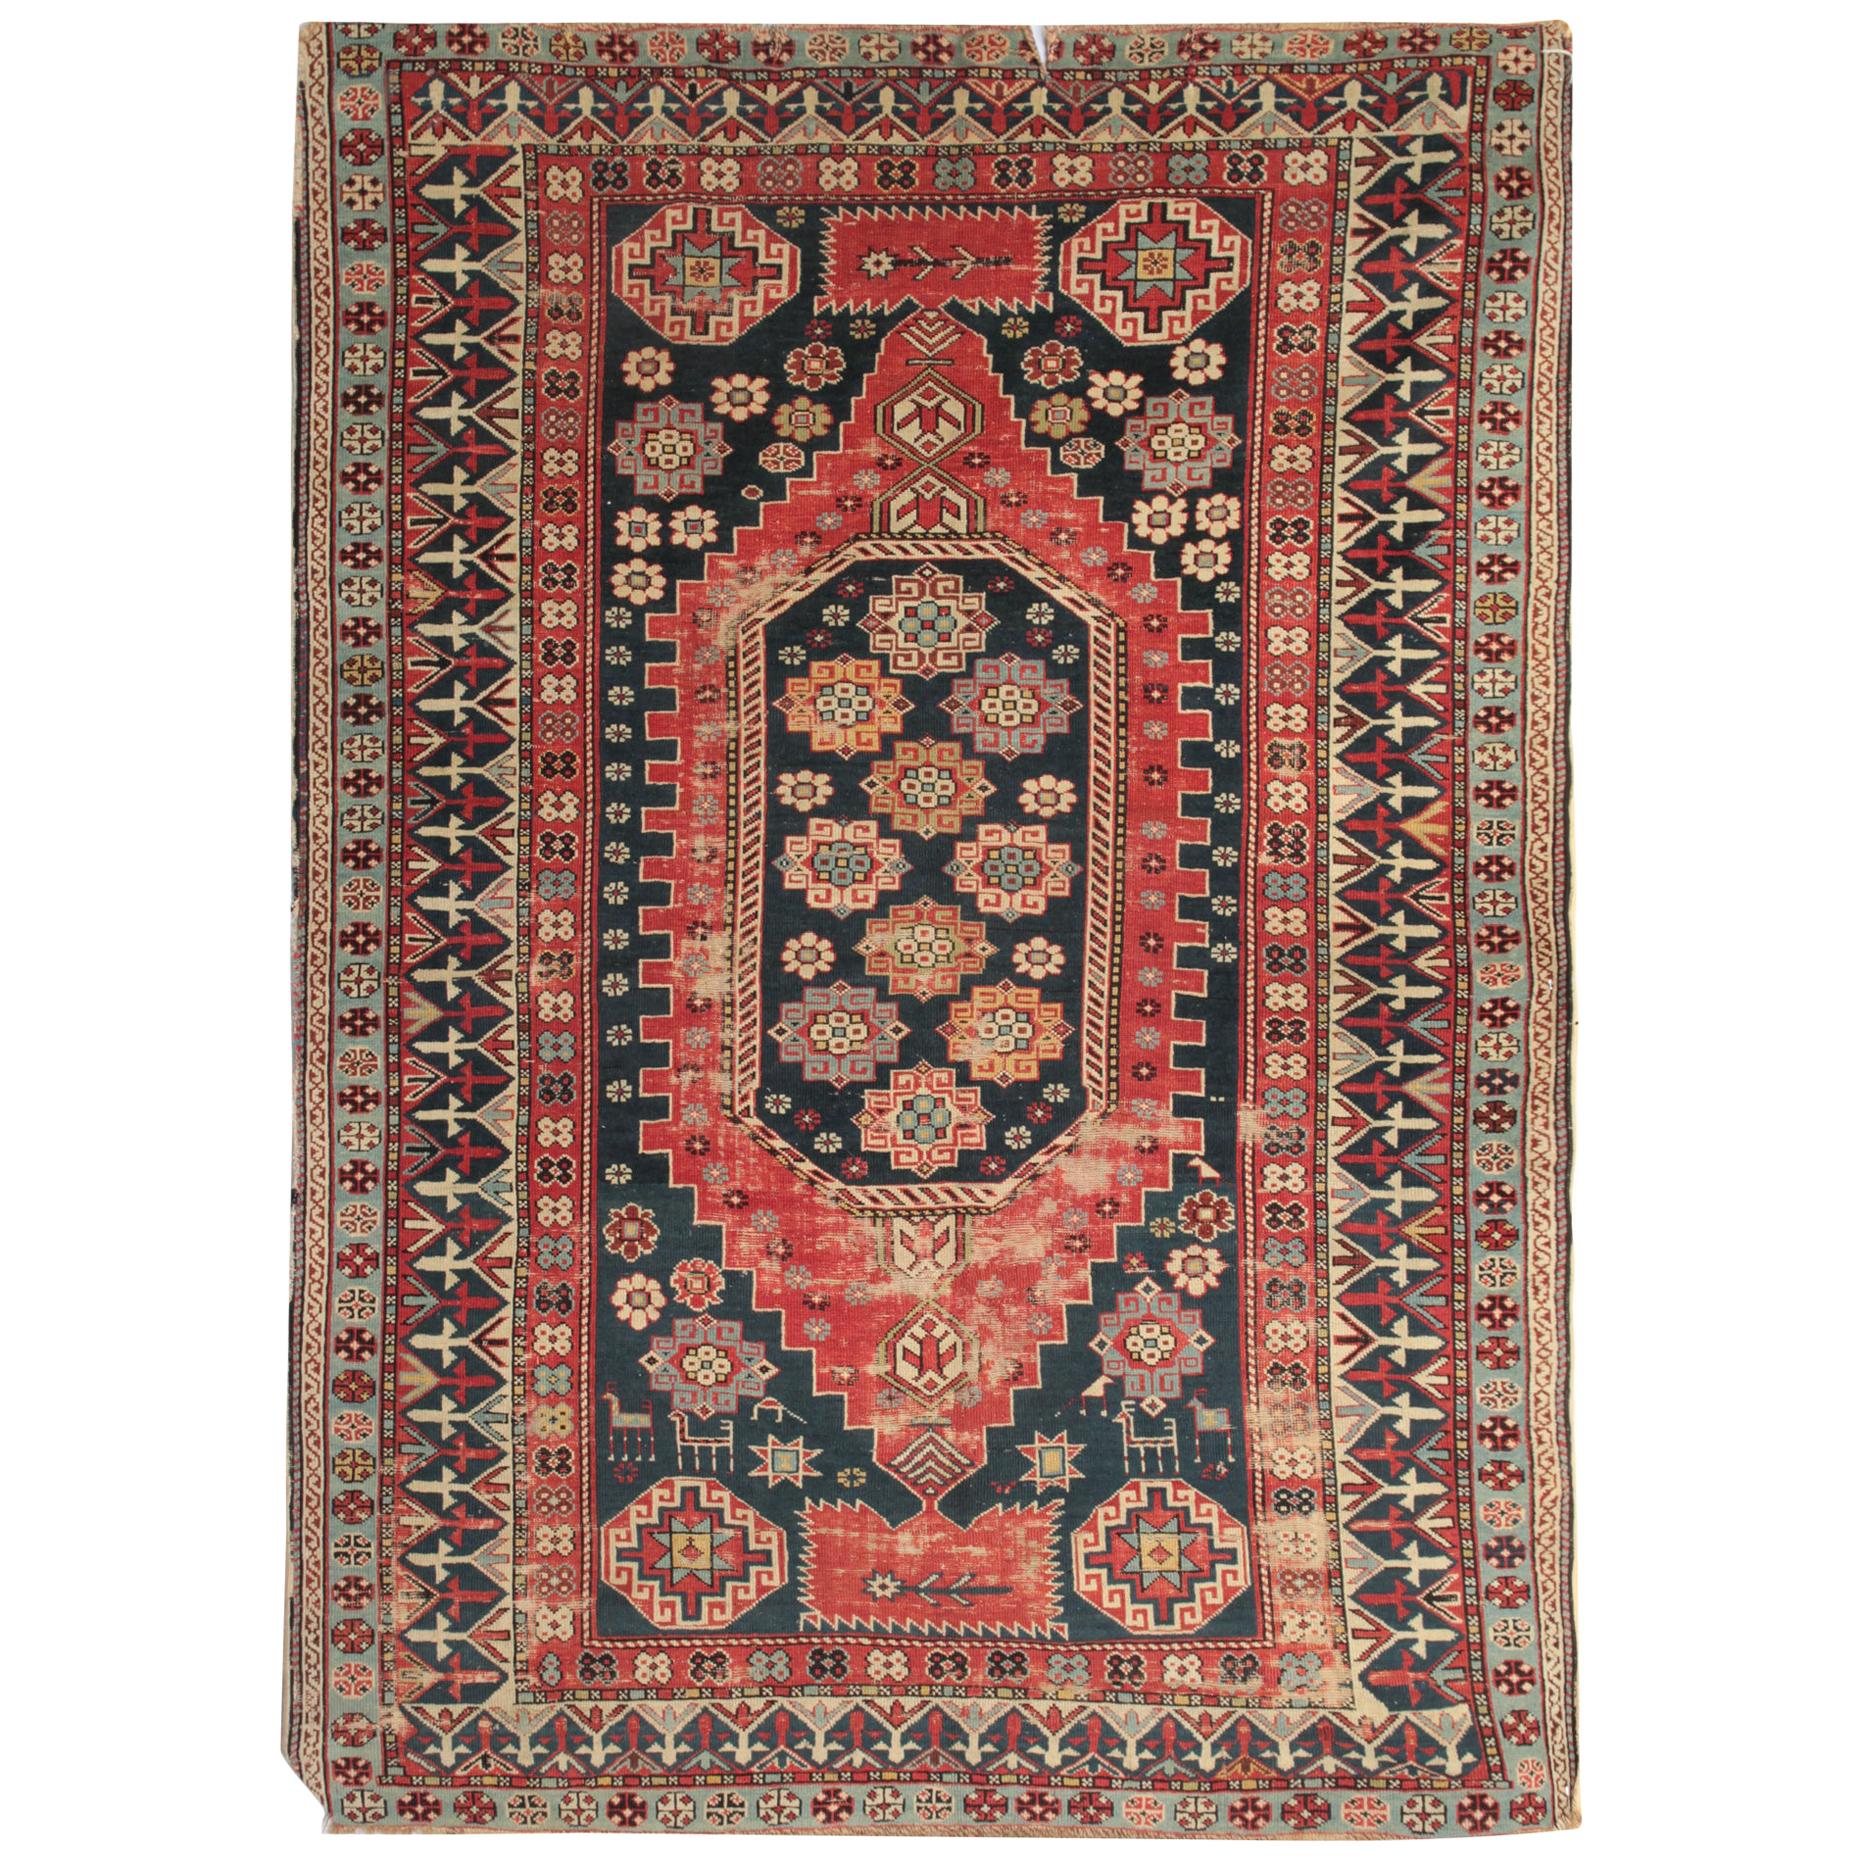 Red Area Rugs for Sale, Antique Rugs Caucasian Carpet, Wool Living Room Rugs